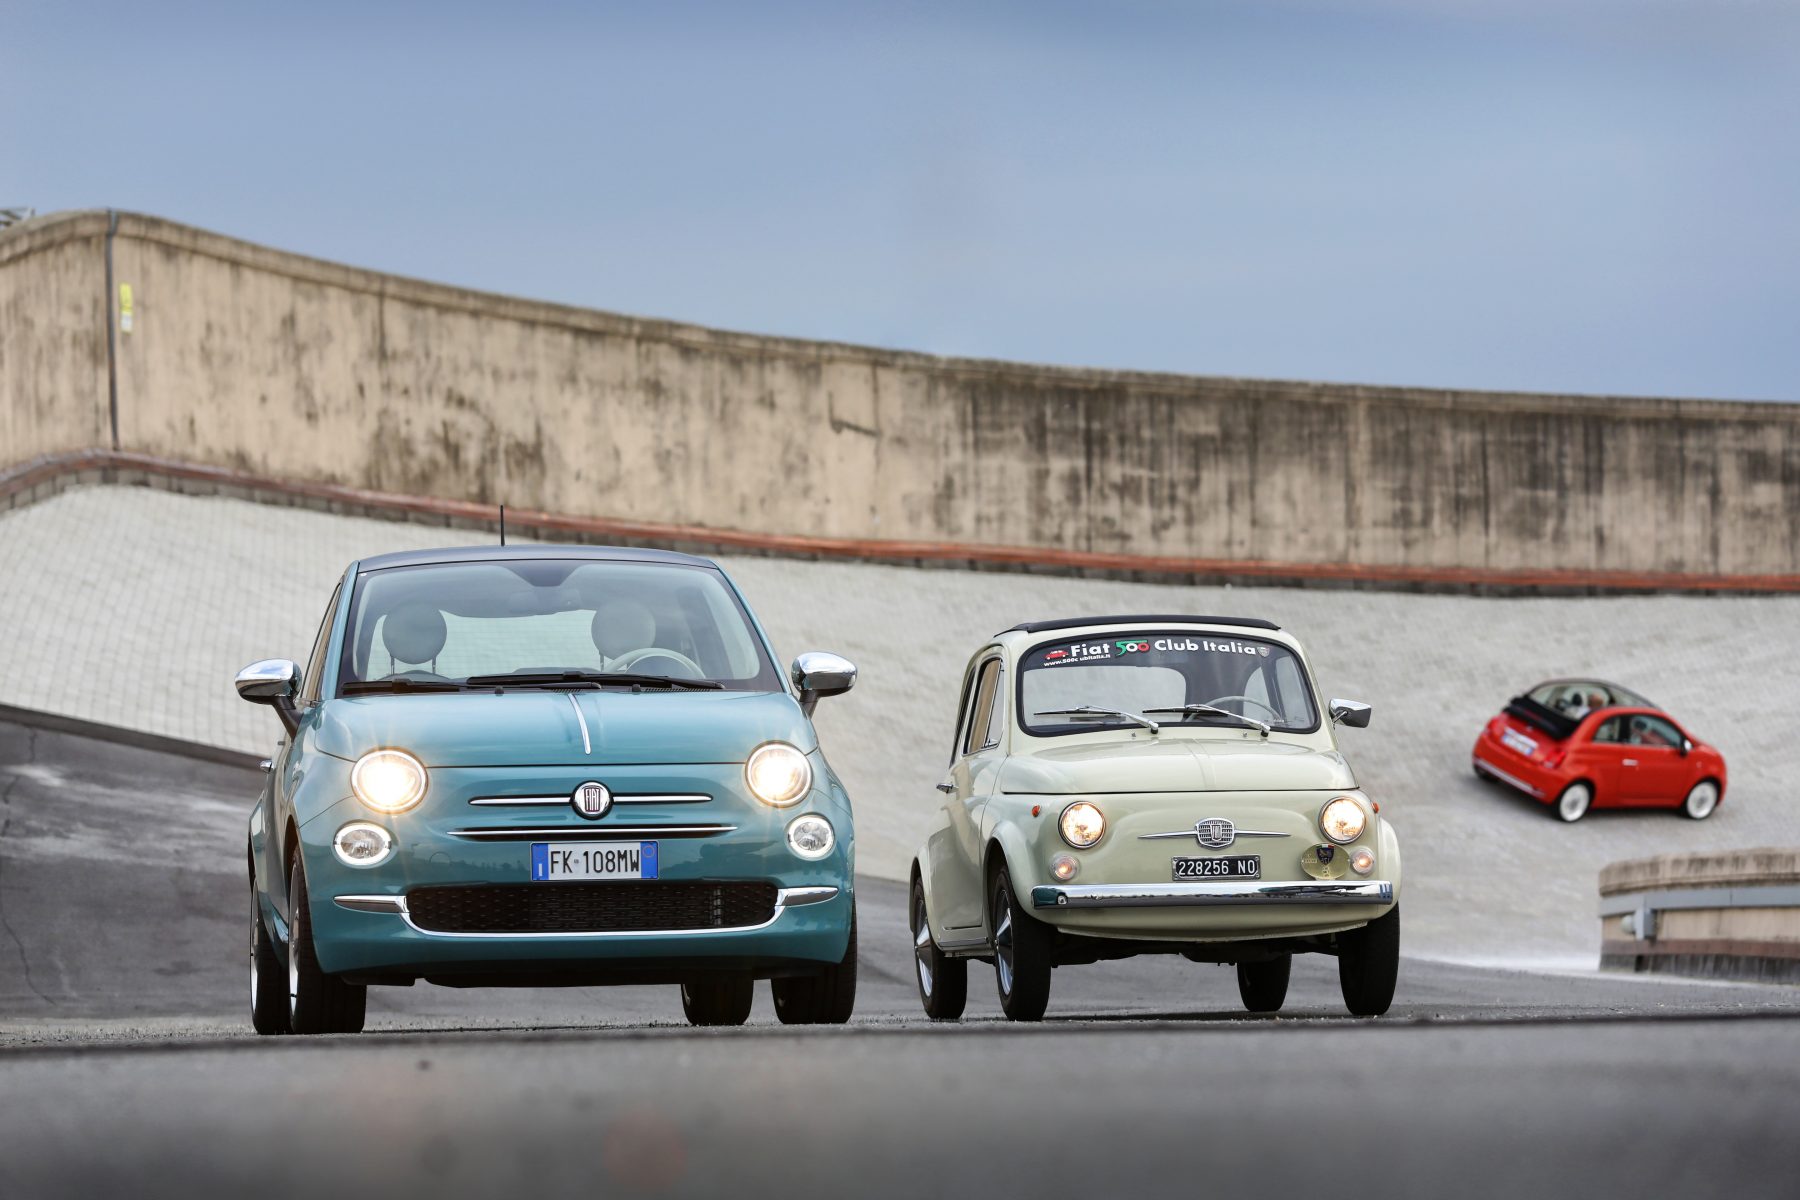 The new and original Fiat 500 driving side by side